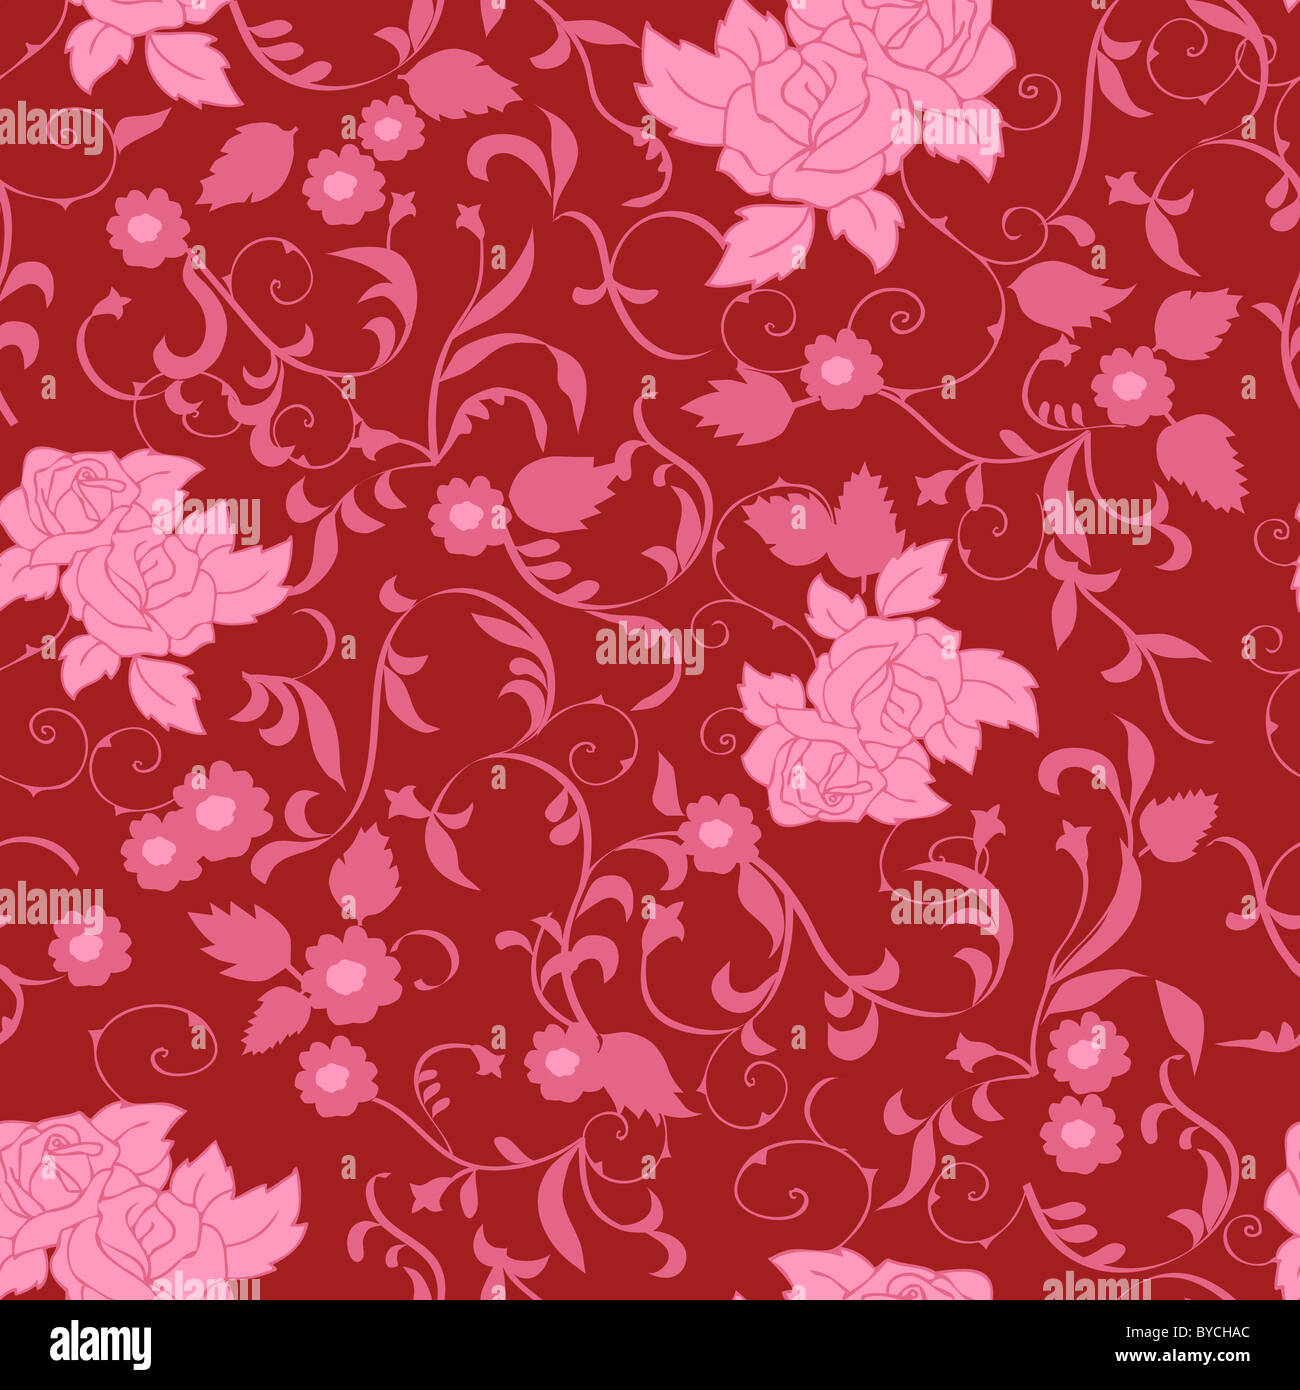 Pink Seamless Floral Pattern Stock Photo